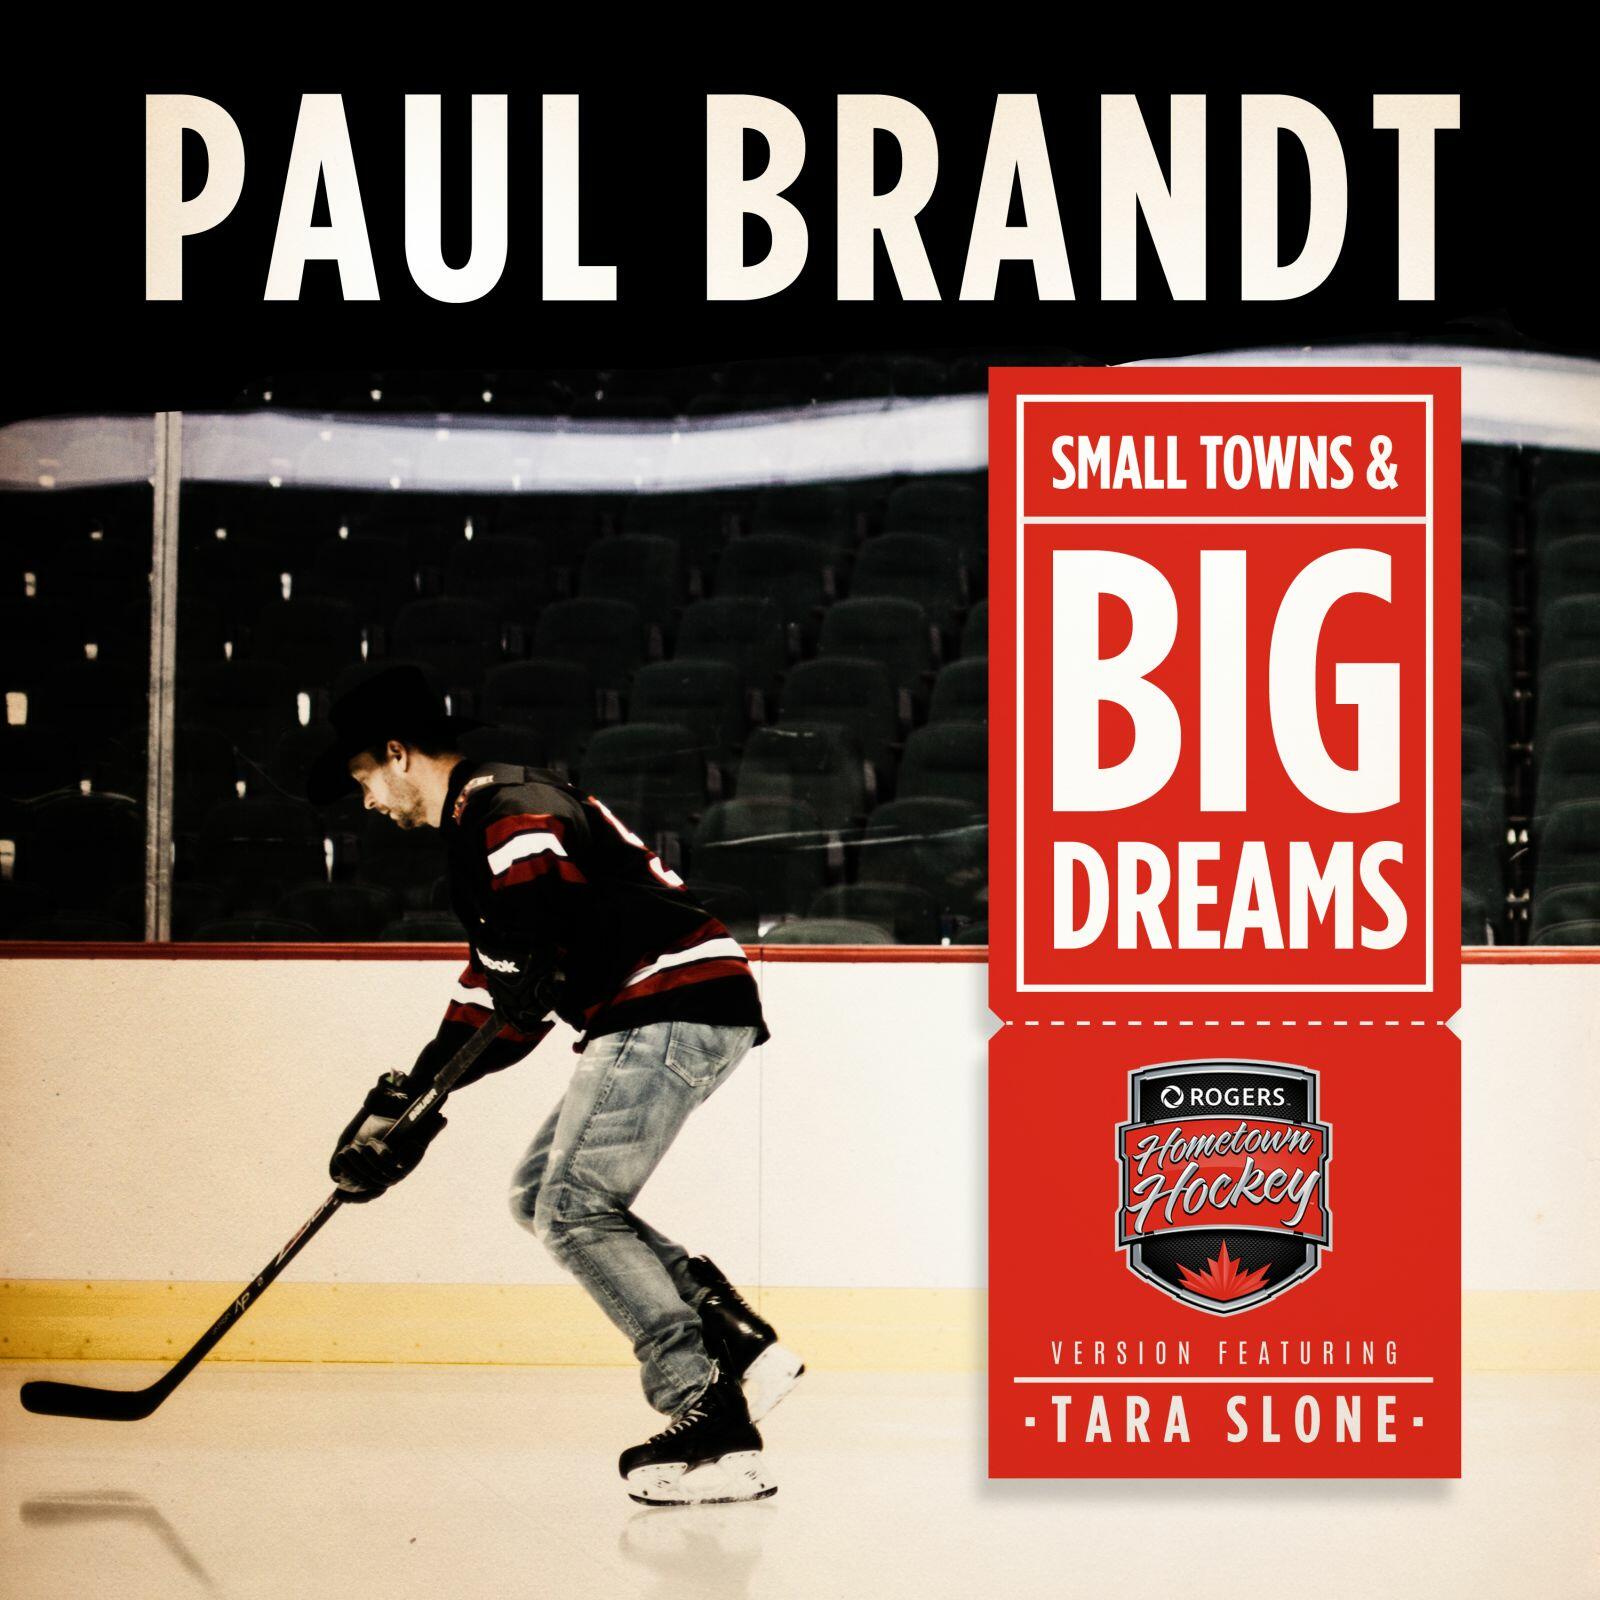 Paul Brandt Small Towns And Big Dreams Hometown Hockey Version Feat 